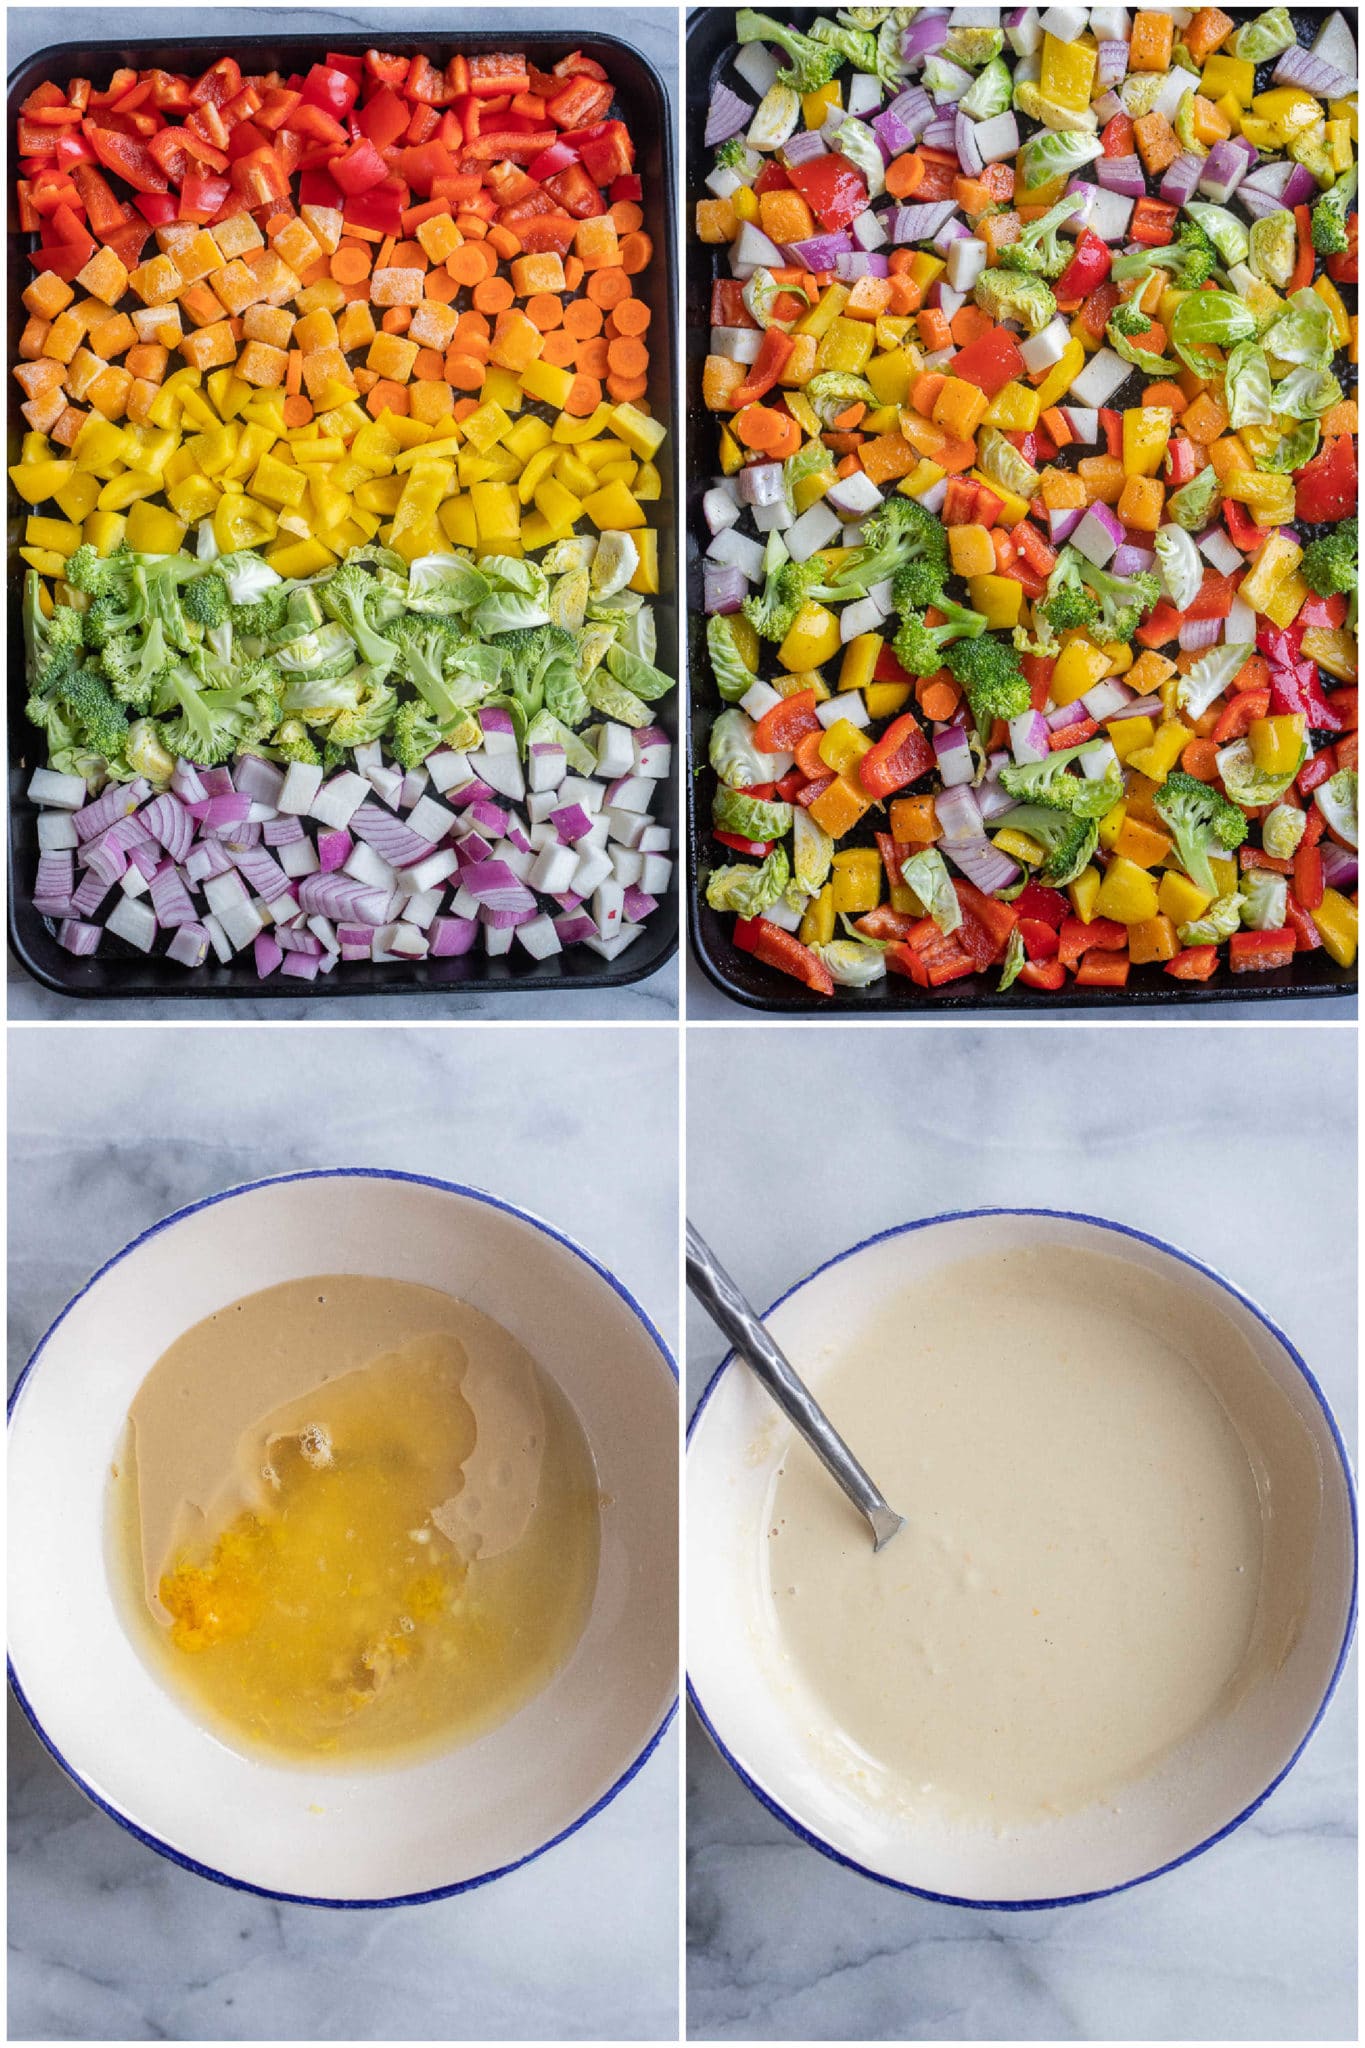 rainbow colored vegetables on a baking sheet being mixed with oil and spices. Showing how the citrus tahini dressing is made